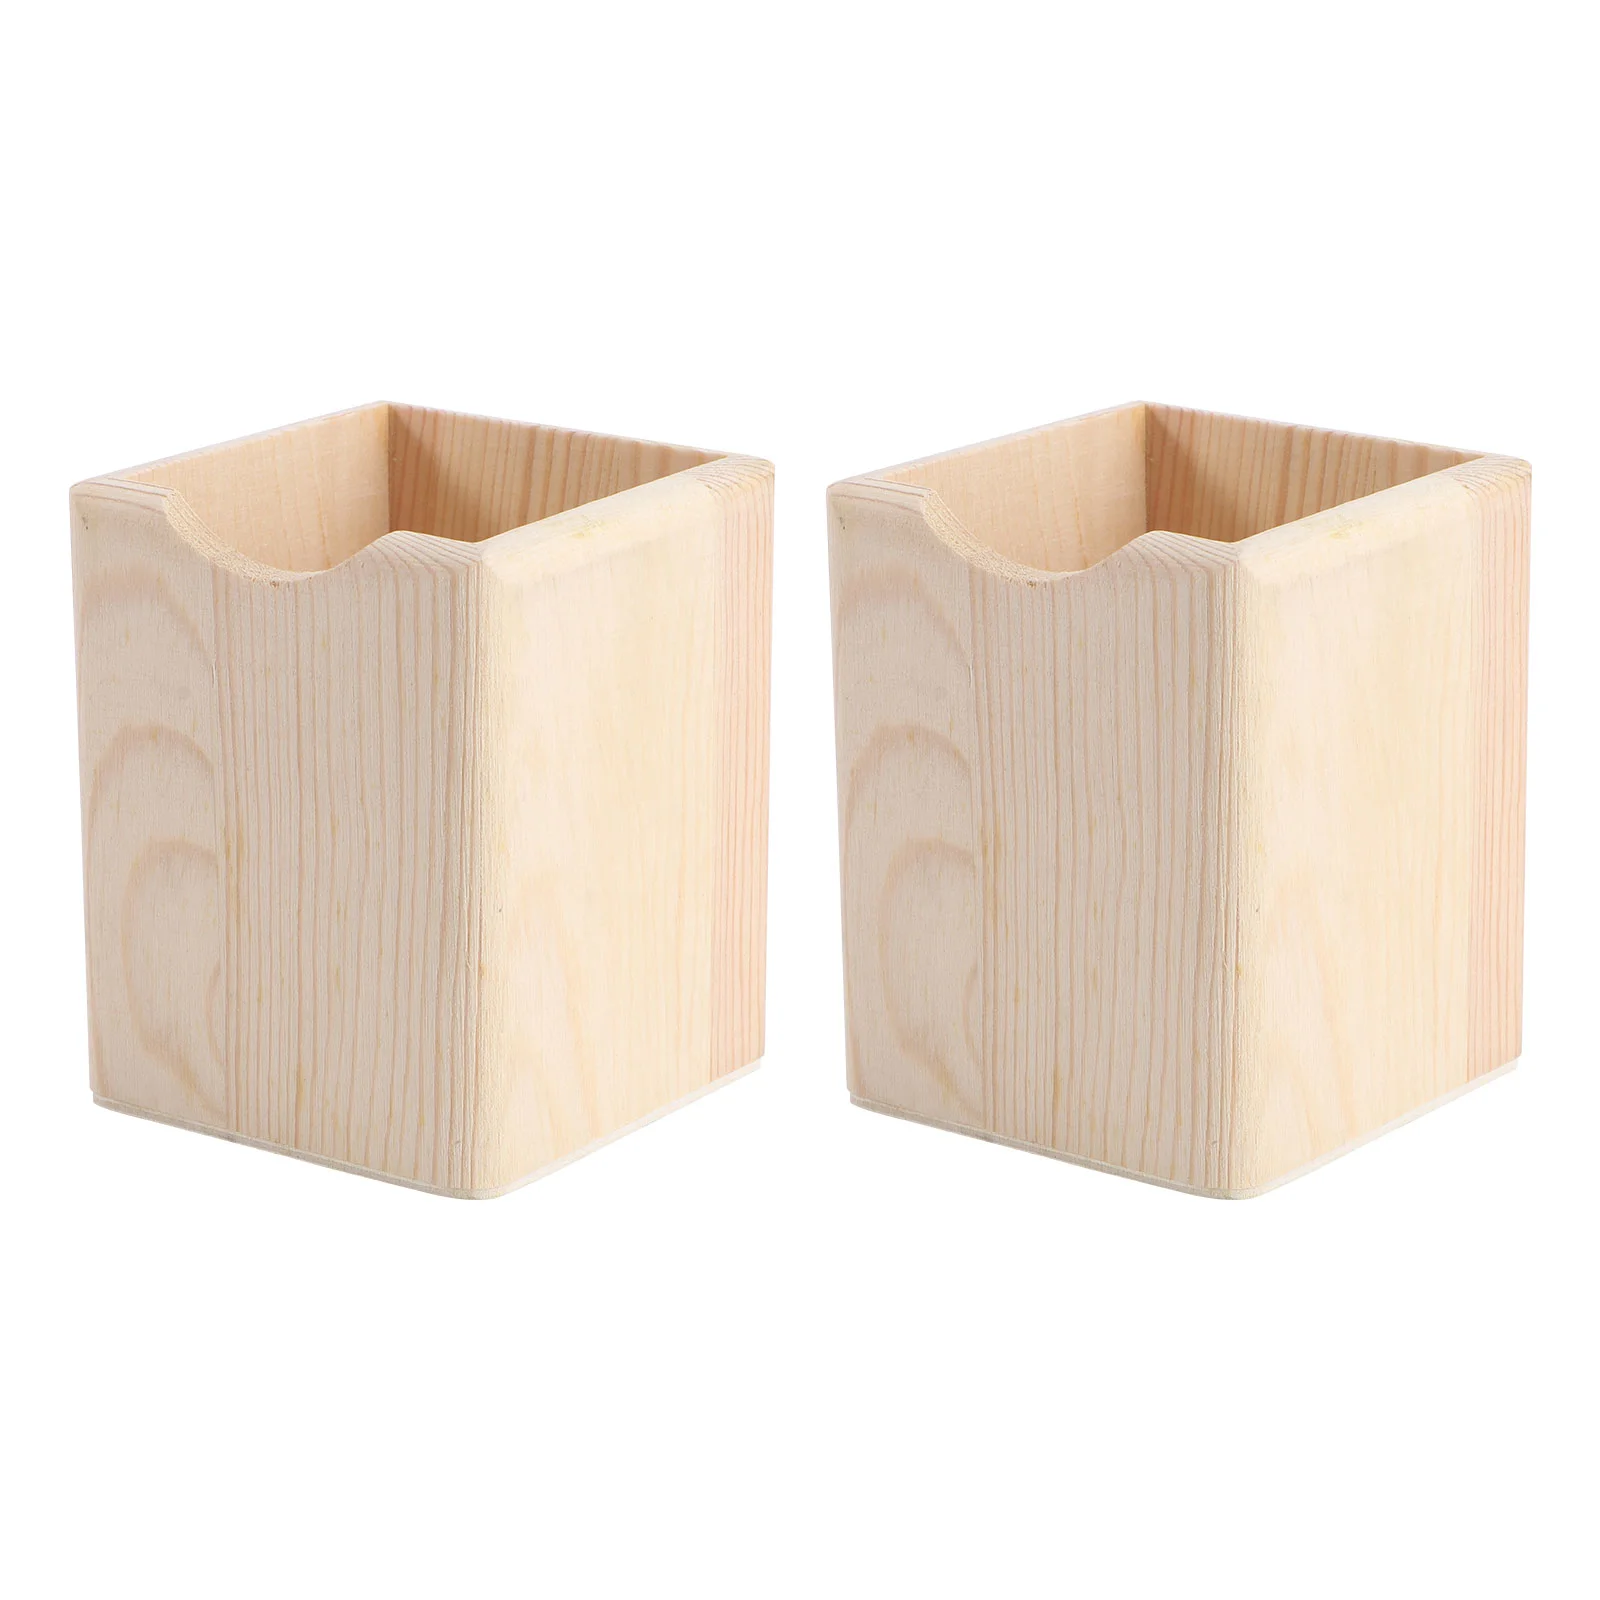 

Holder Pen Wooden Container Wood Brush Box Organizer Desk Pot Makeup Cup Diy Organize Office Compartments Square Single